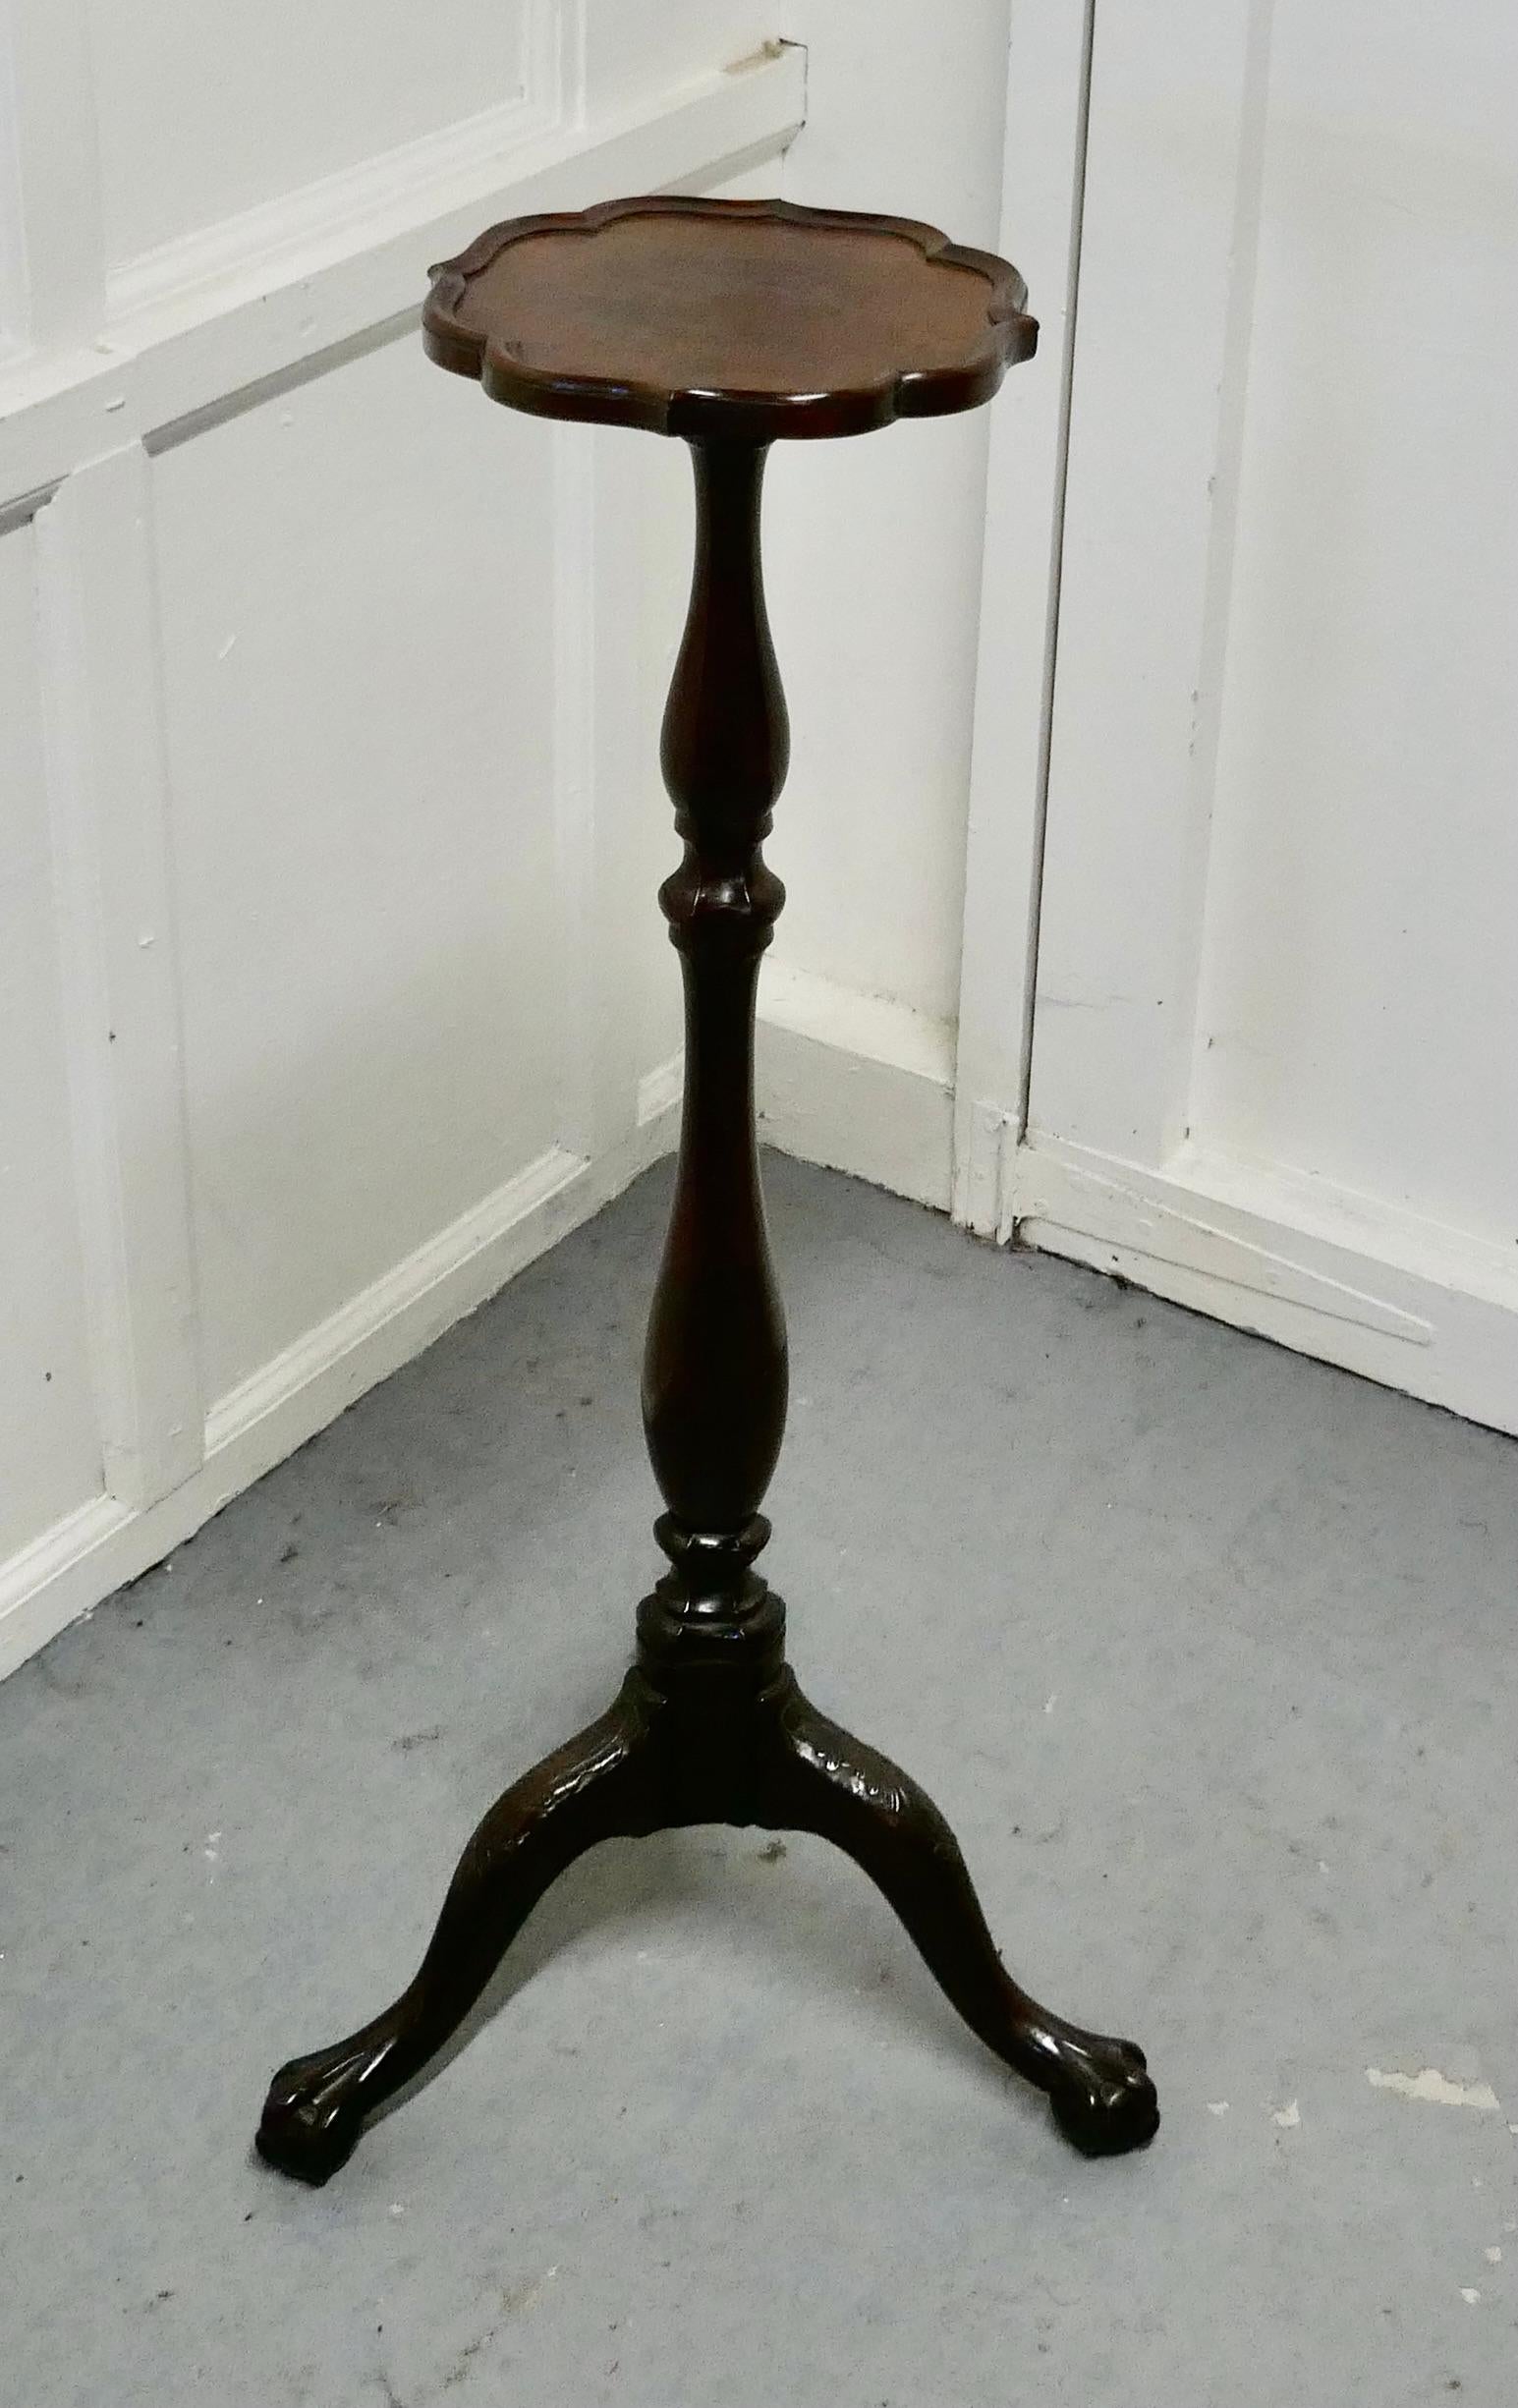 Mahogany torchere or lamp stand

This is a fine quality piece made in mahogany, the torchere has a 10”scallop shaped top with a raised moulded rim. 
It stands on a carved 3 footed base with detailed acanthus leaf carving to the feet 
The stand